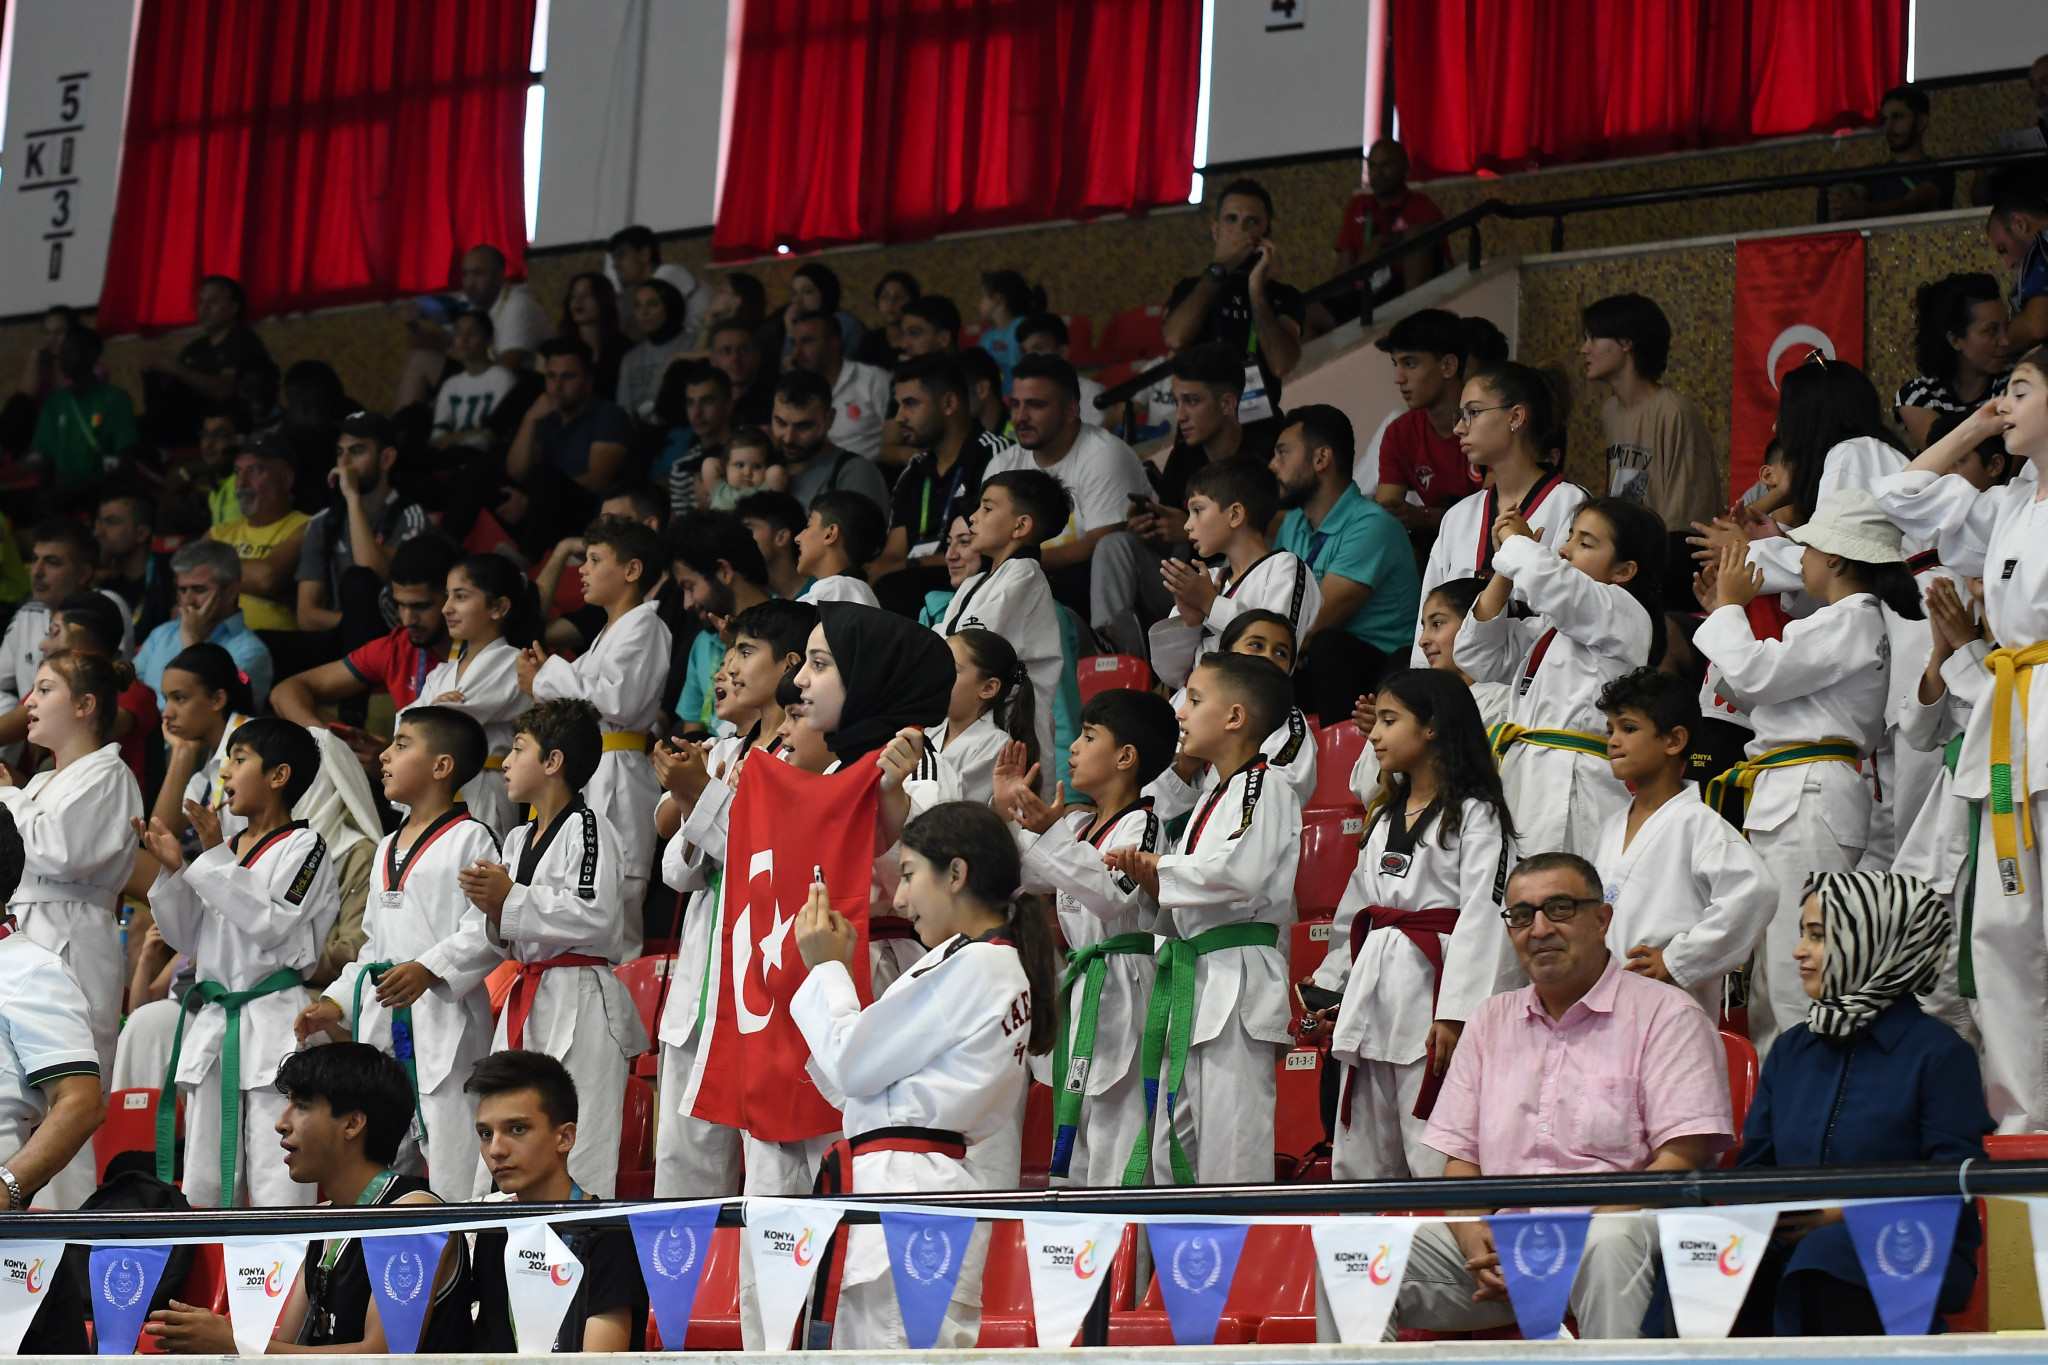 Fans flocked to various venues to watch the first day of competition after yesterday's Opening Ceremony ©Konya2021